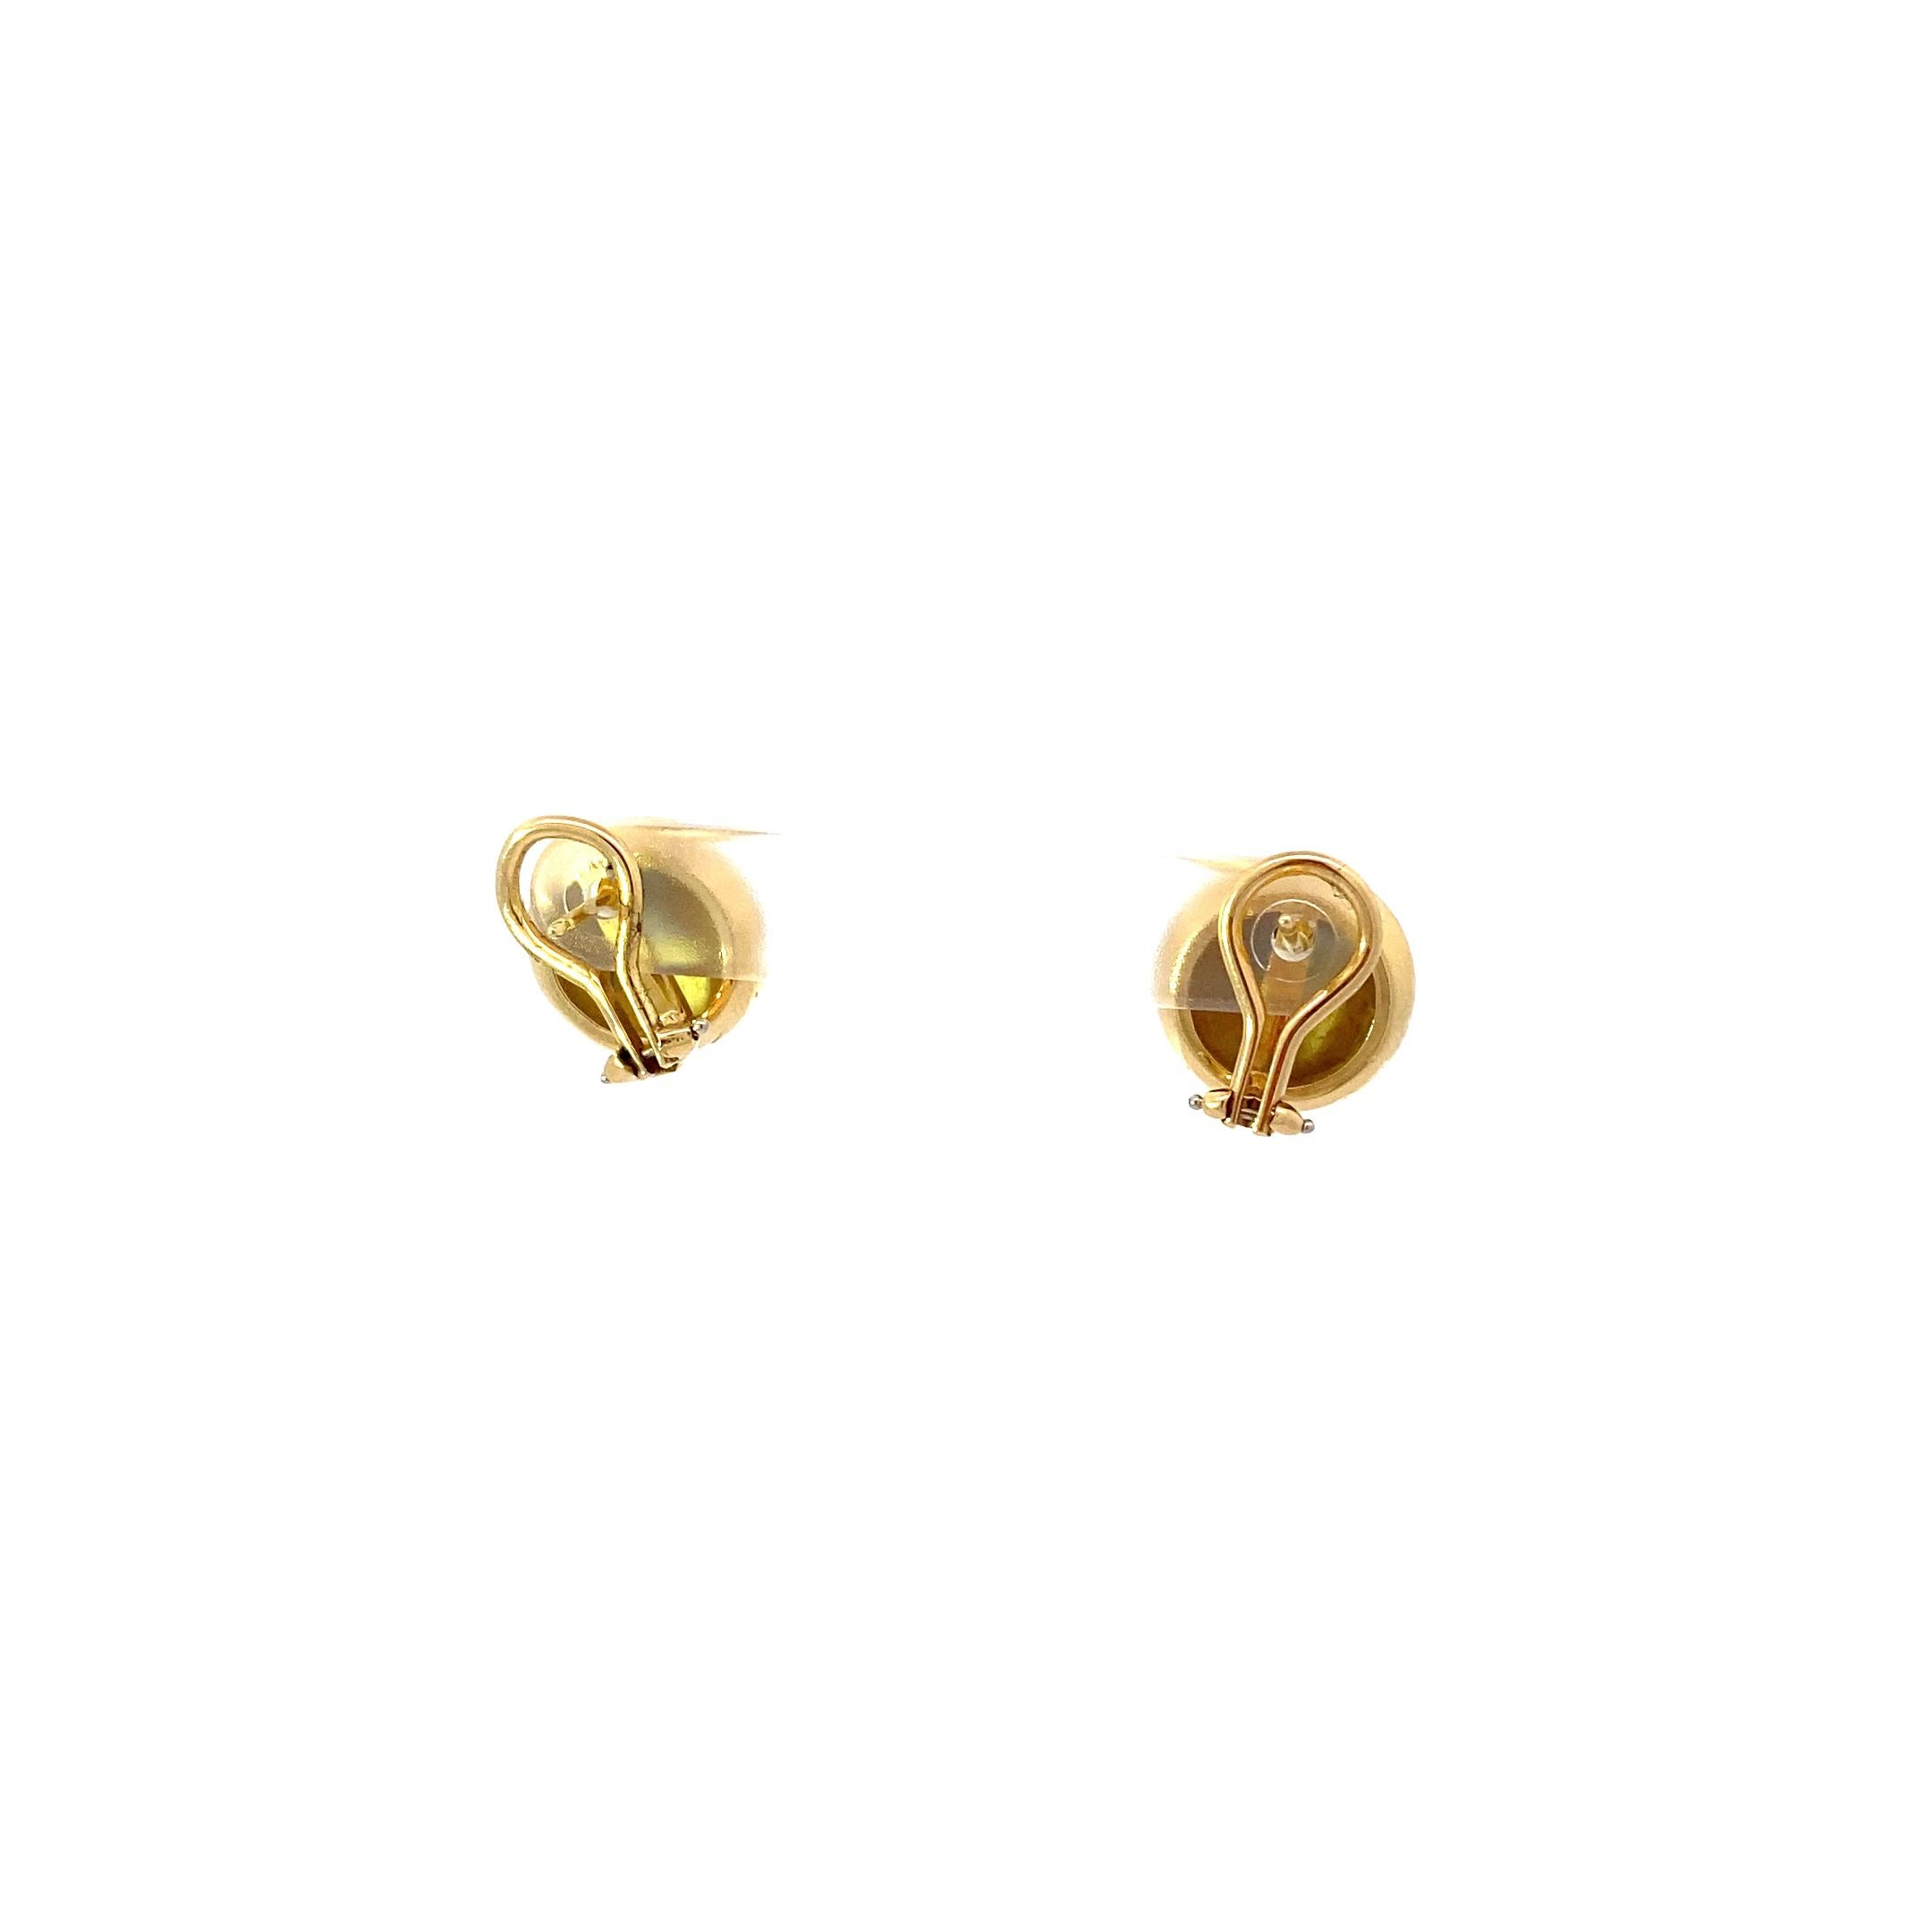 Michael Bondanza is a credit to the New York Jewelry scene. Each piece is custom made in New York City with collections bearing names of iconic NYC areas.

These are a fun little earring that can easily go from day to night. Ultra luxe in 18k gold